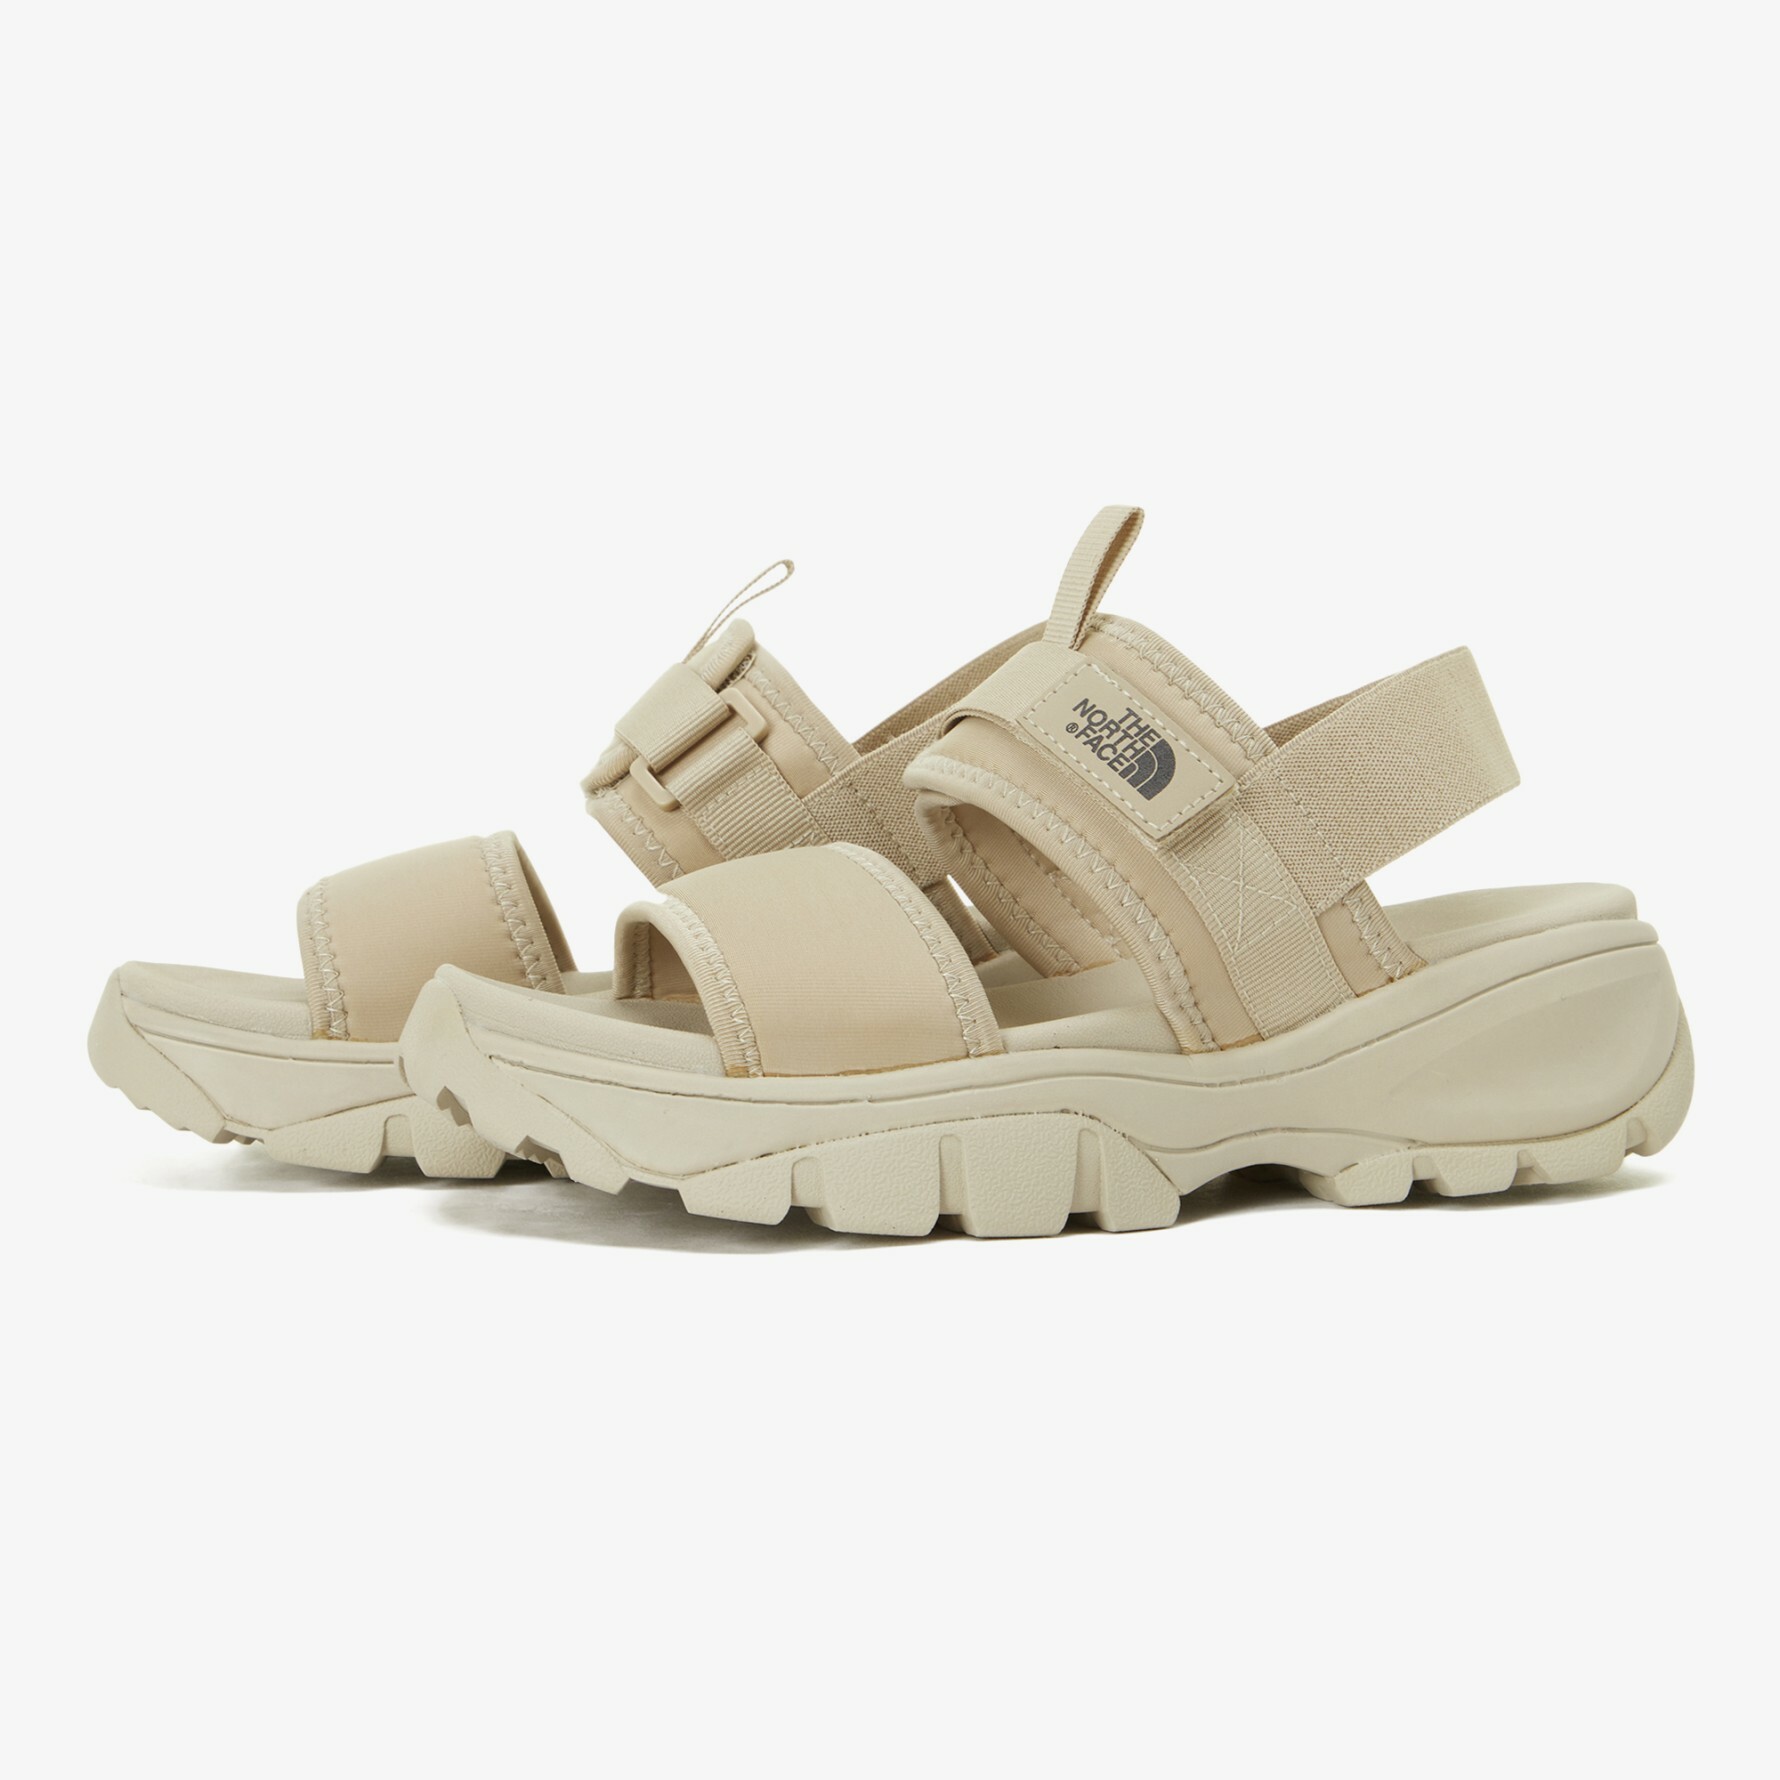 THE NORTH FACE 白標HEXA LUX SANDAL 厚底涼鞋NS98P31